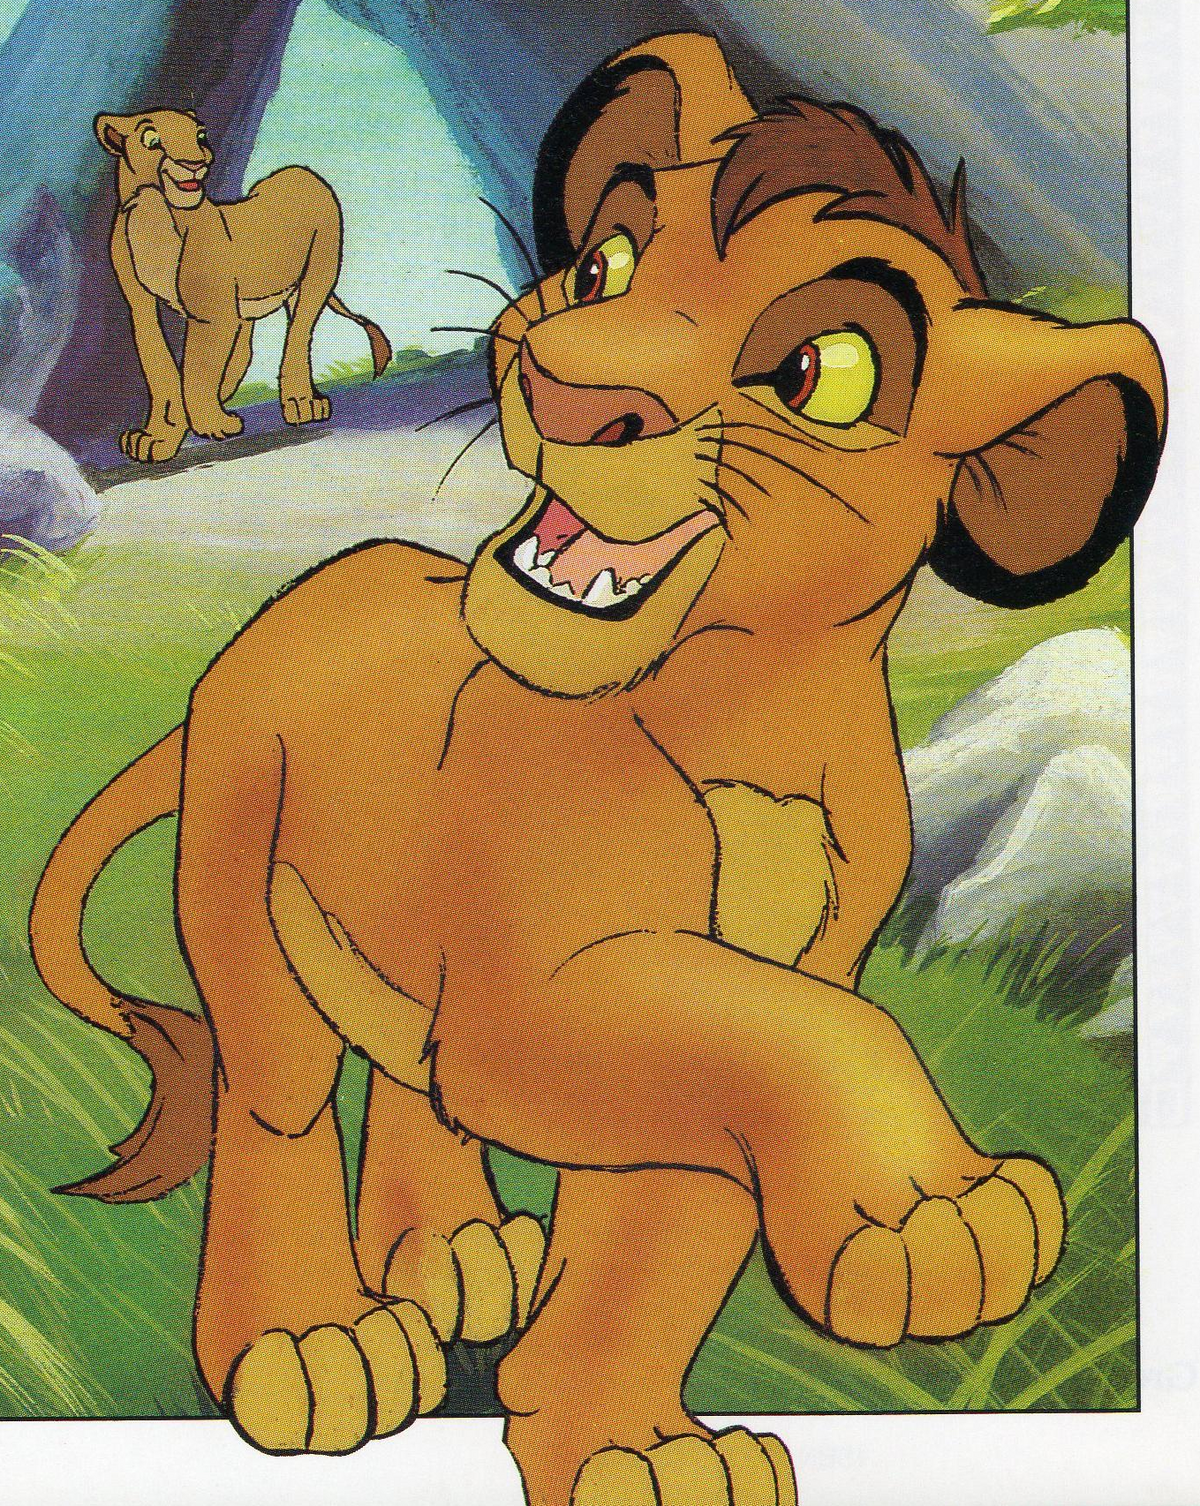 Scaredy Cats, The Lion King Wiki